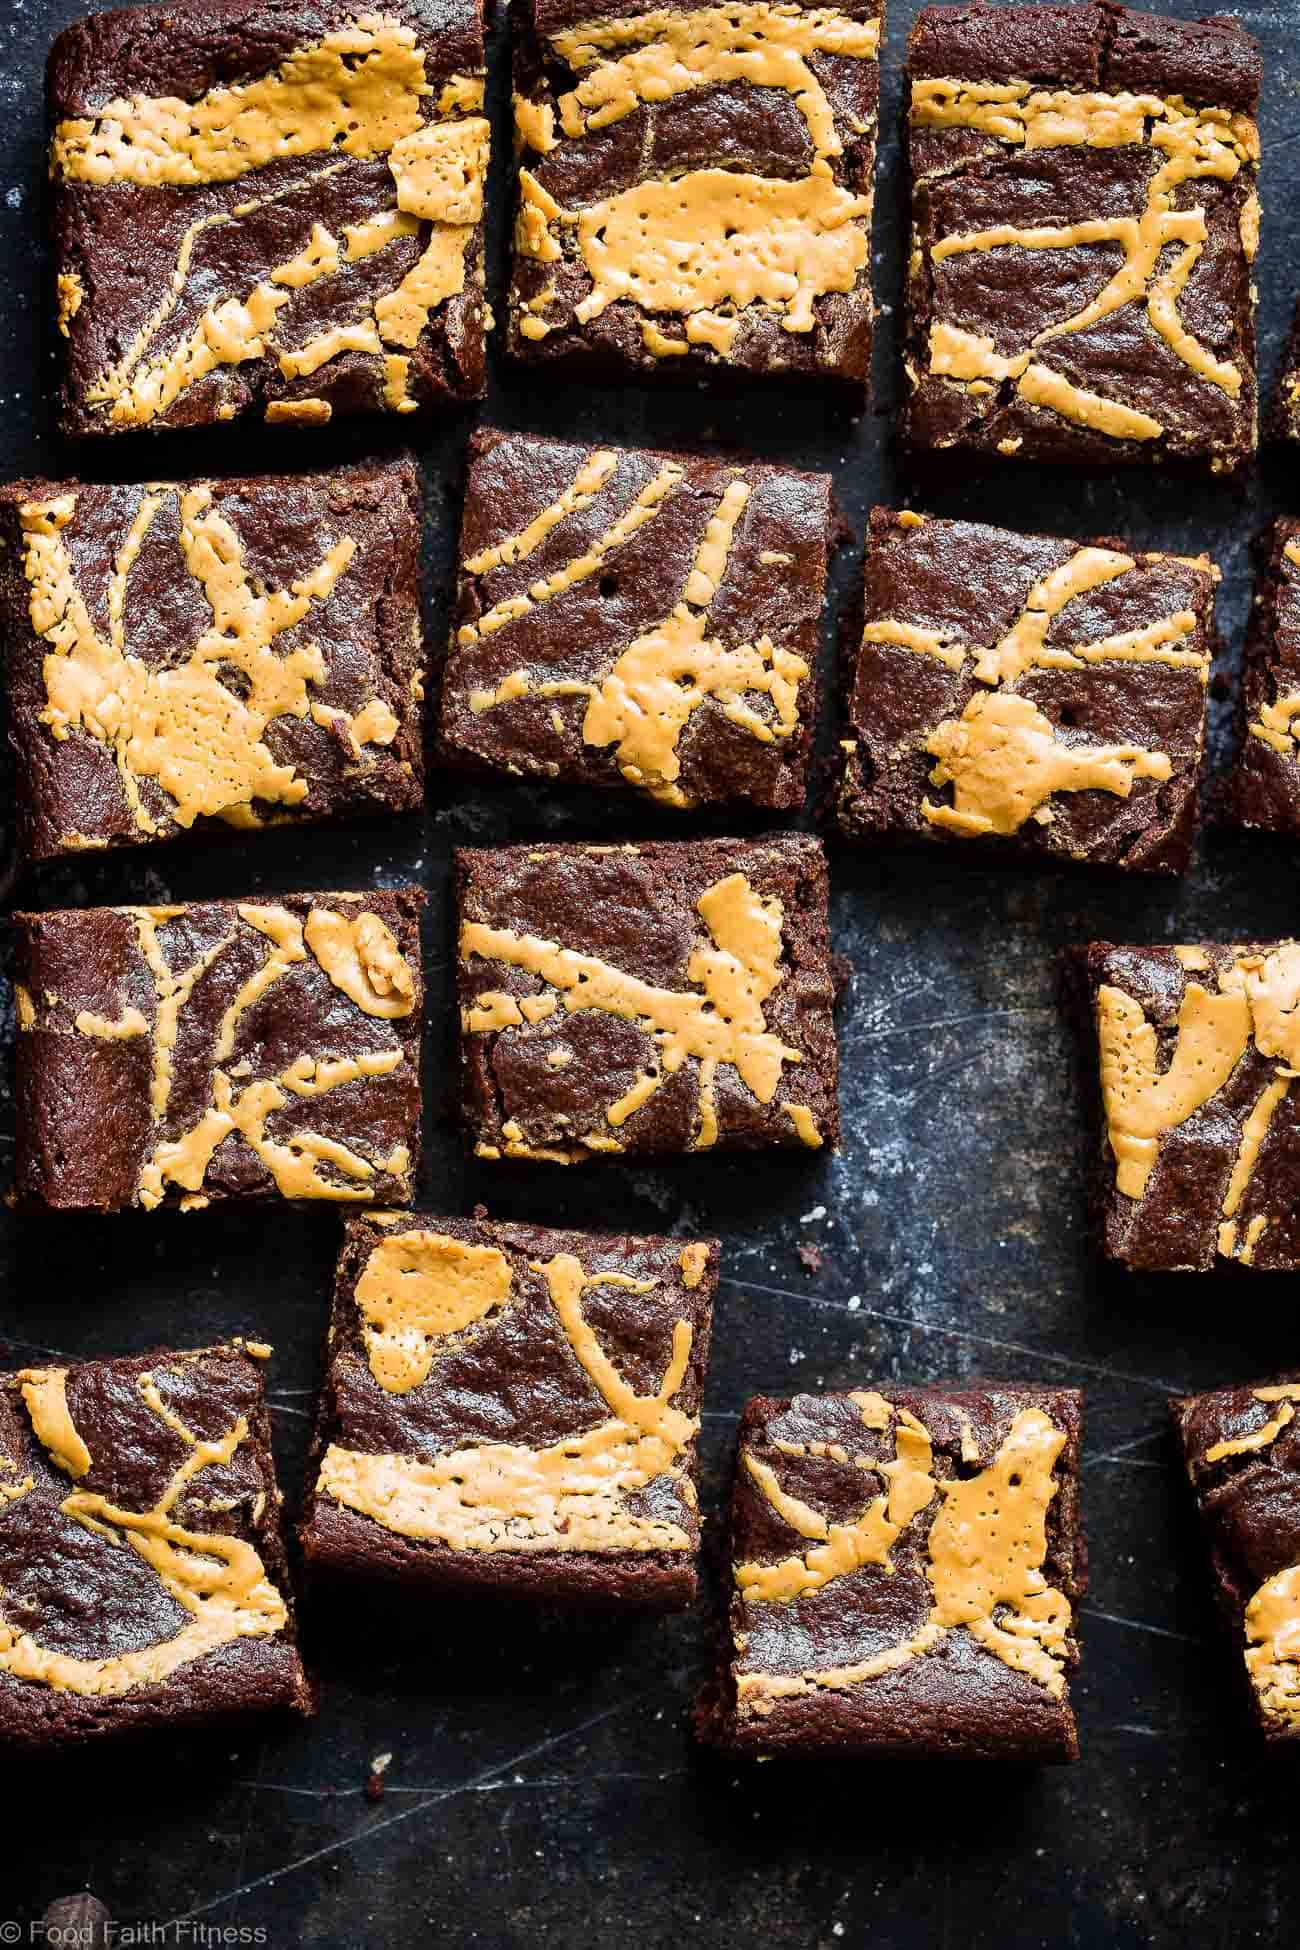 The BEST Paleo Almond Butter Brownies - SO dense, chewy and fudgy that will never believe these are gluten/grain/dairy/oil free and only 150 calories! Made in one bowl and SO easy! | #Foodfaithfitness | #Paleo #glutenfree #brownies #paleobrownies #almondbutter